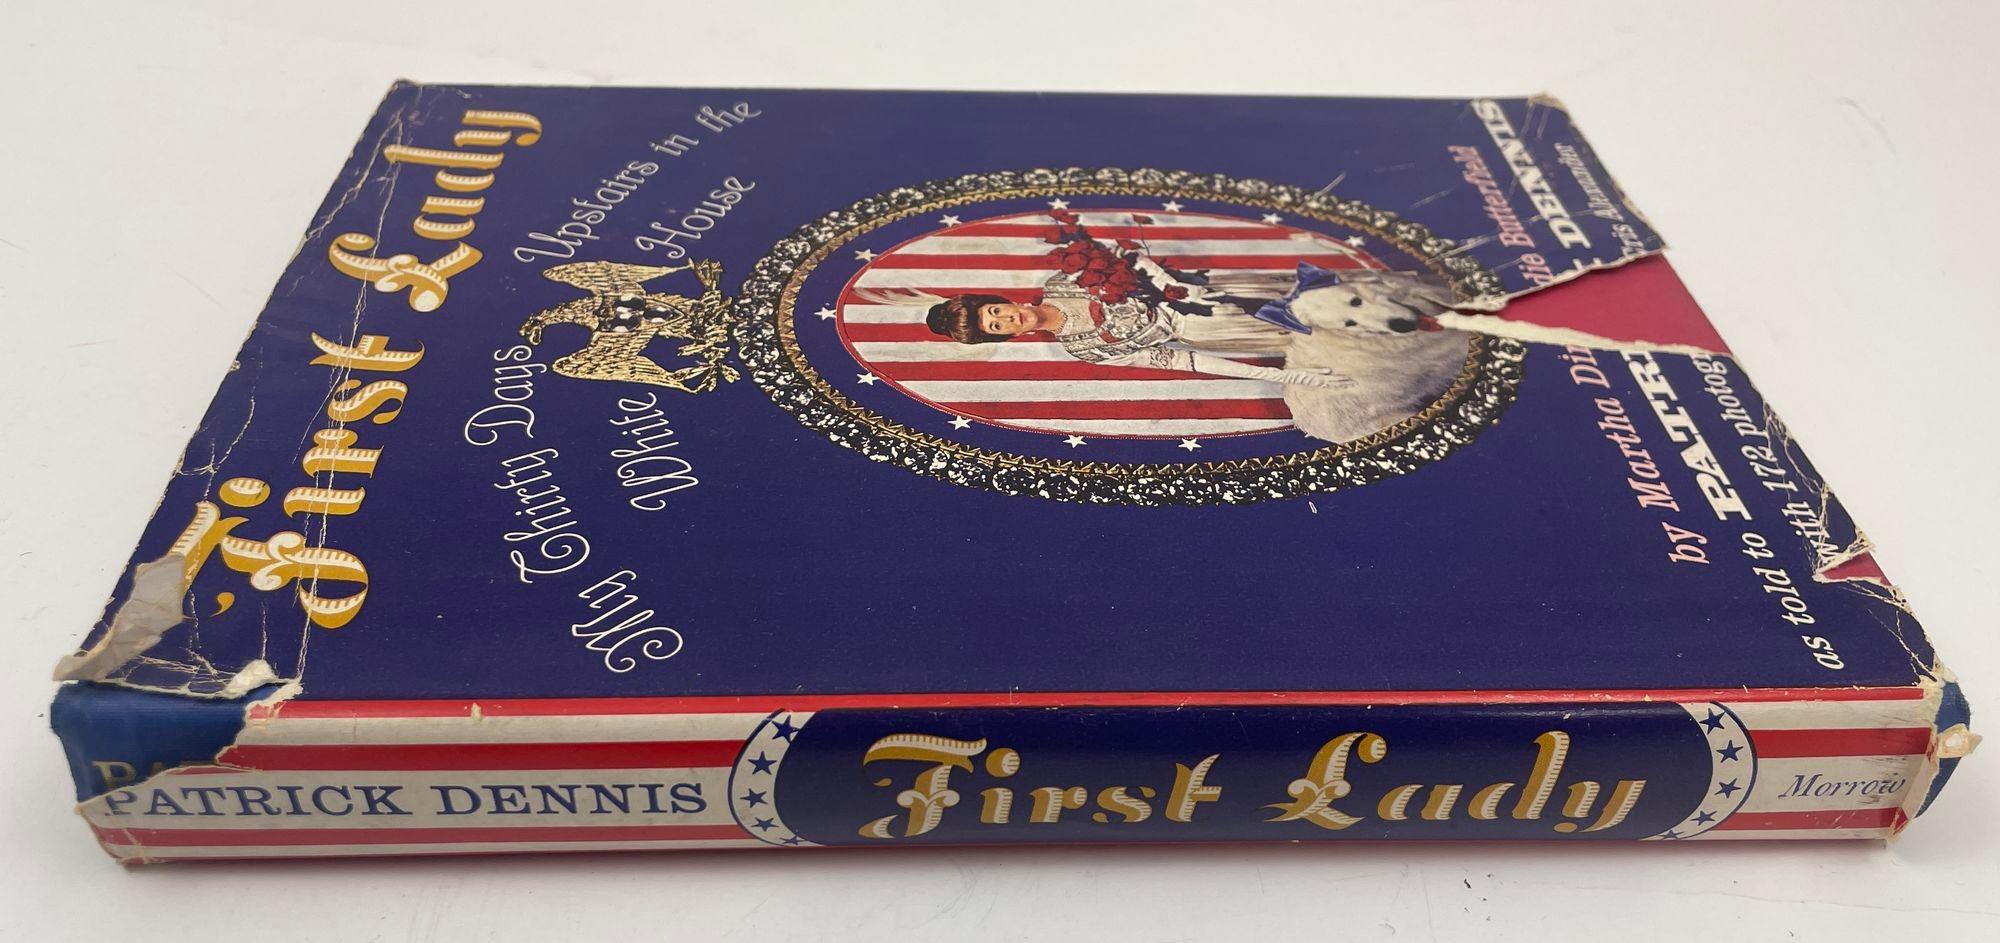 
Vintage collectible book, First Lady: My Thirty Days Upstairs in the White House Hardcover – January 1, 1964.
Title: First Lady : My Thirty Days Upstairs in the White house.
by Martha Dinwiddie Butterfield (Author), Chris Alexander